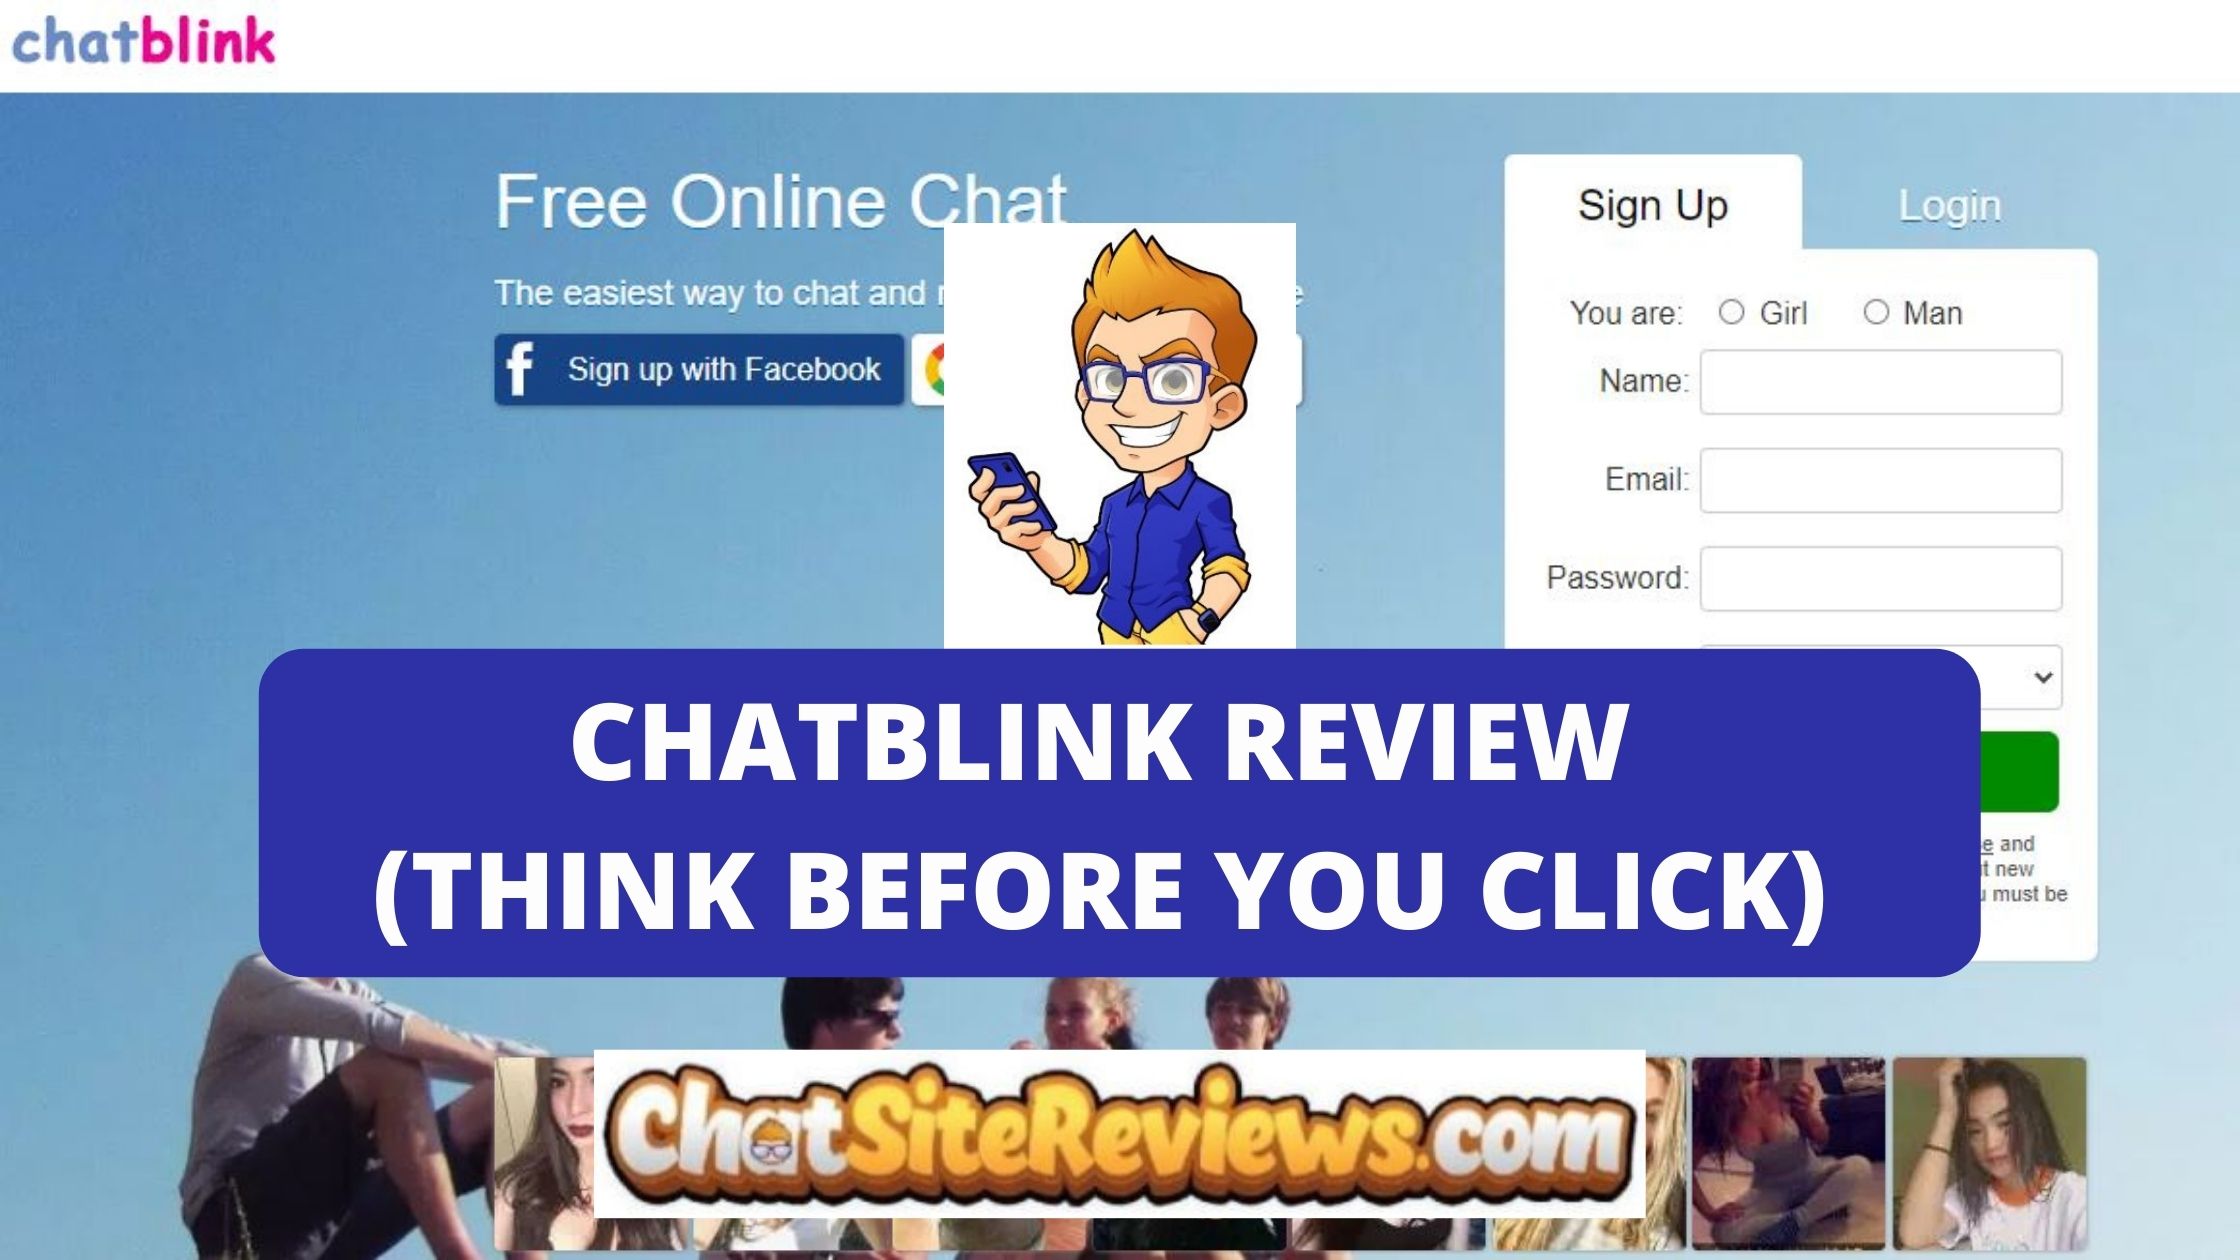 Chatblink Review (Think Before You Click) Chat Site Reviews